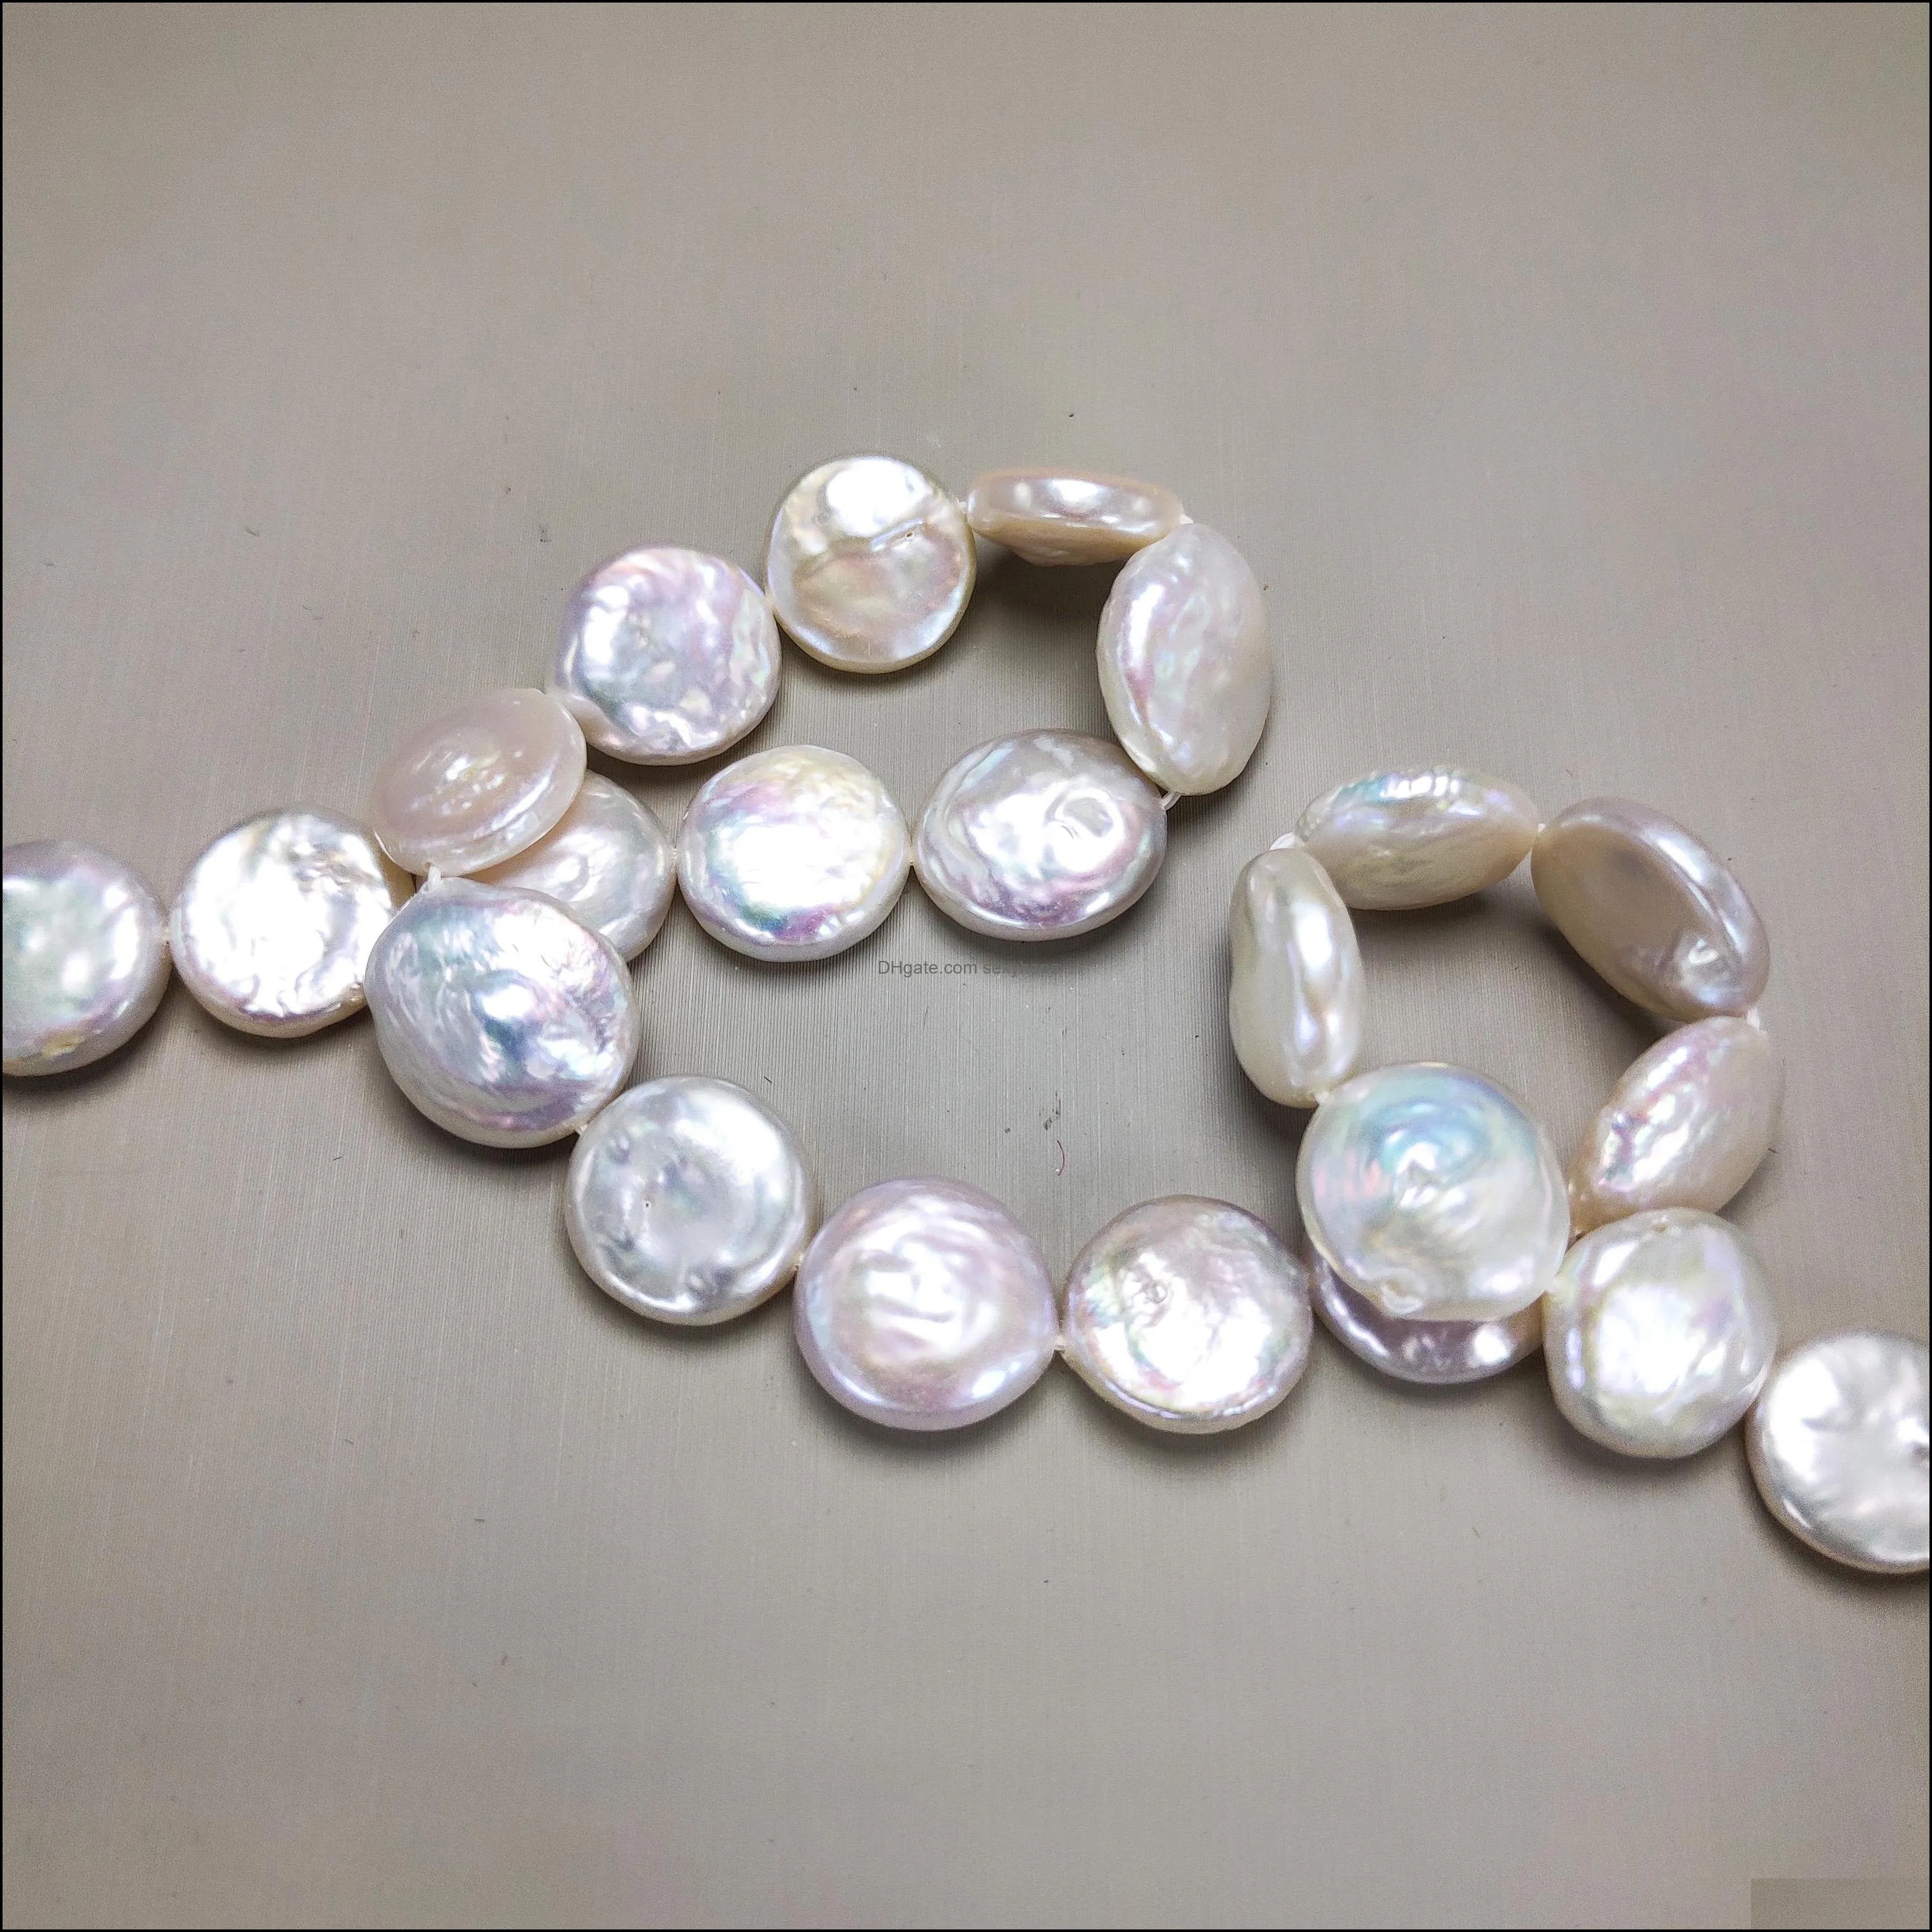 100% Natural Baroque Pearl Bead DIY Jewelry Full Hole 5 Style Mix 40cm White Baroque Pearl Loose Beads diy Christmas Gift